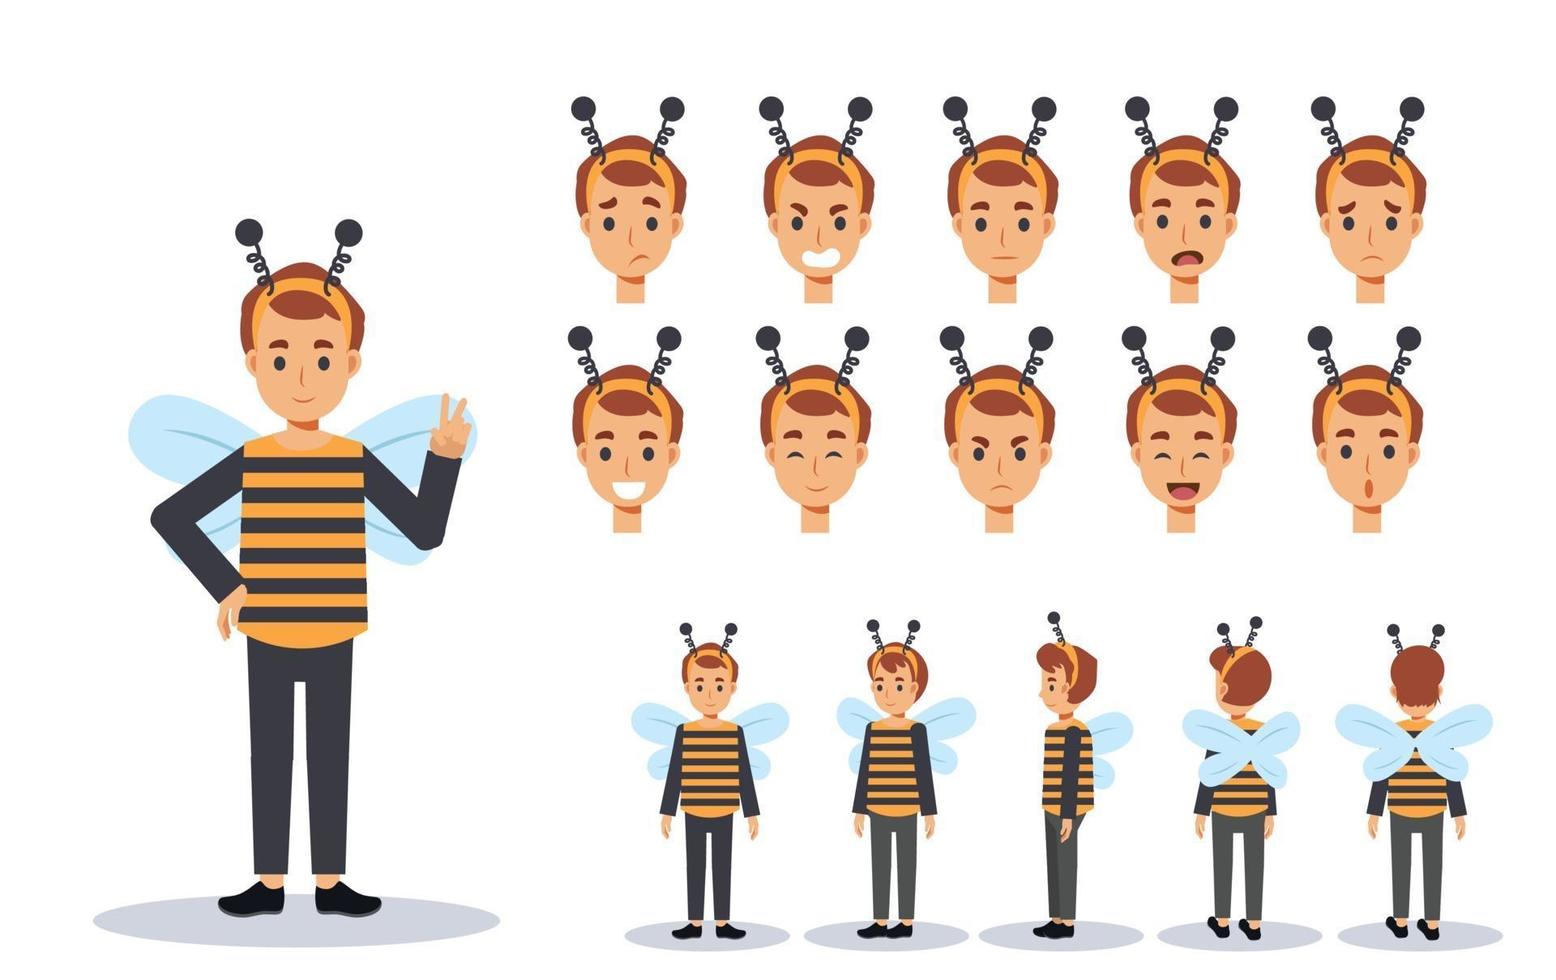 Little Boy in bee costume for Halloween festival.various views. vector